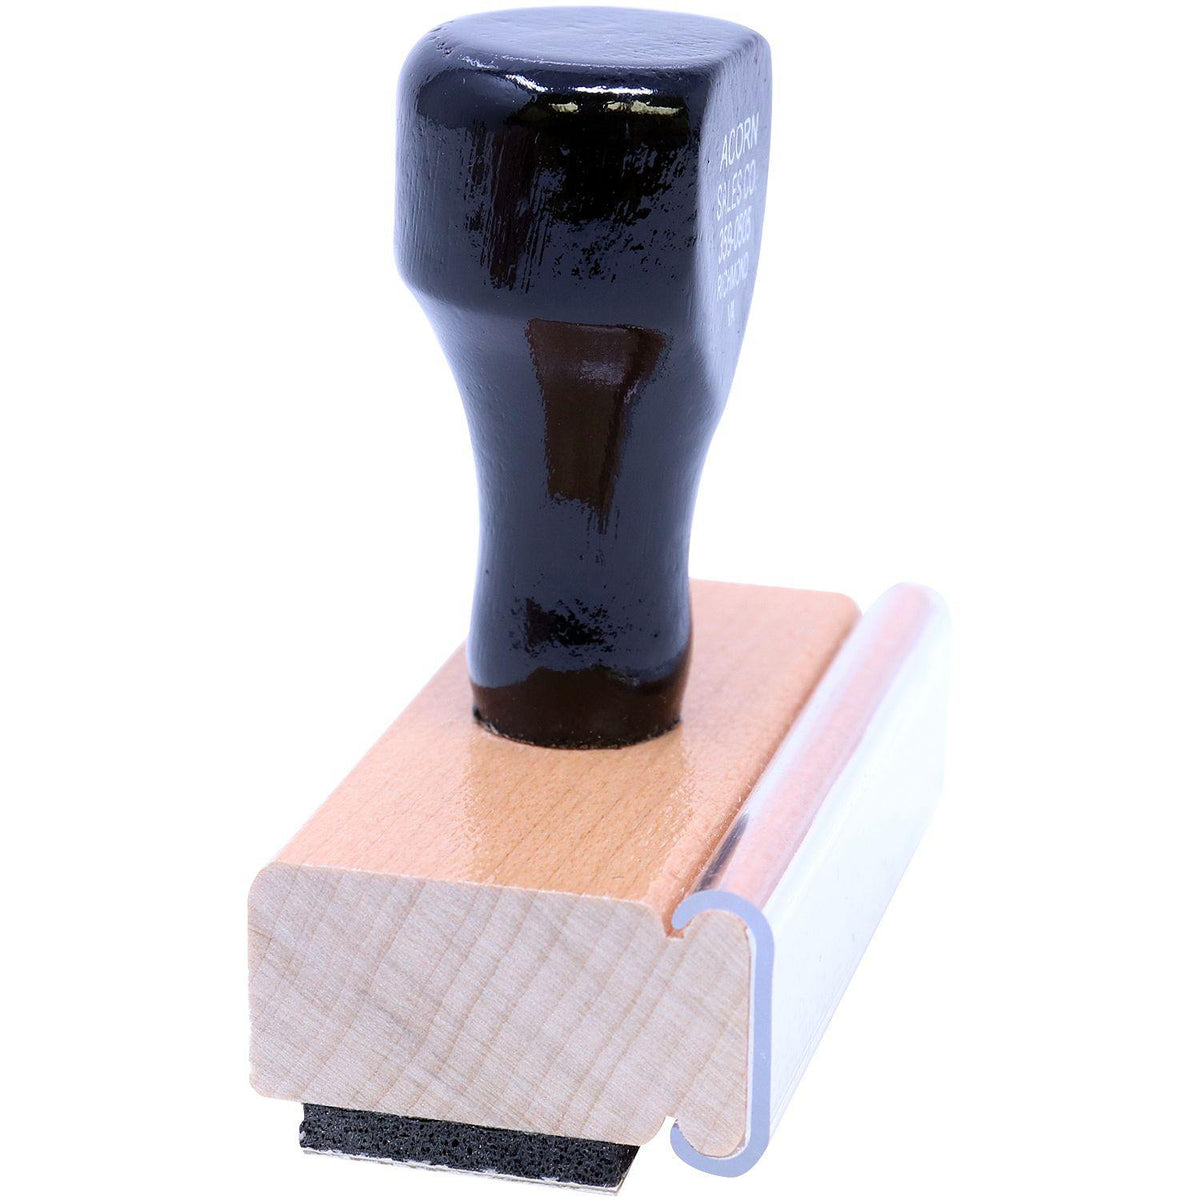 Side View of Balanced Rubber Stamp at an Angle